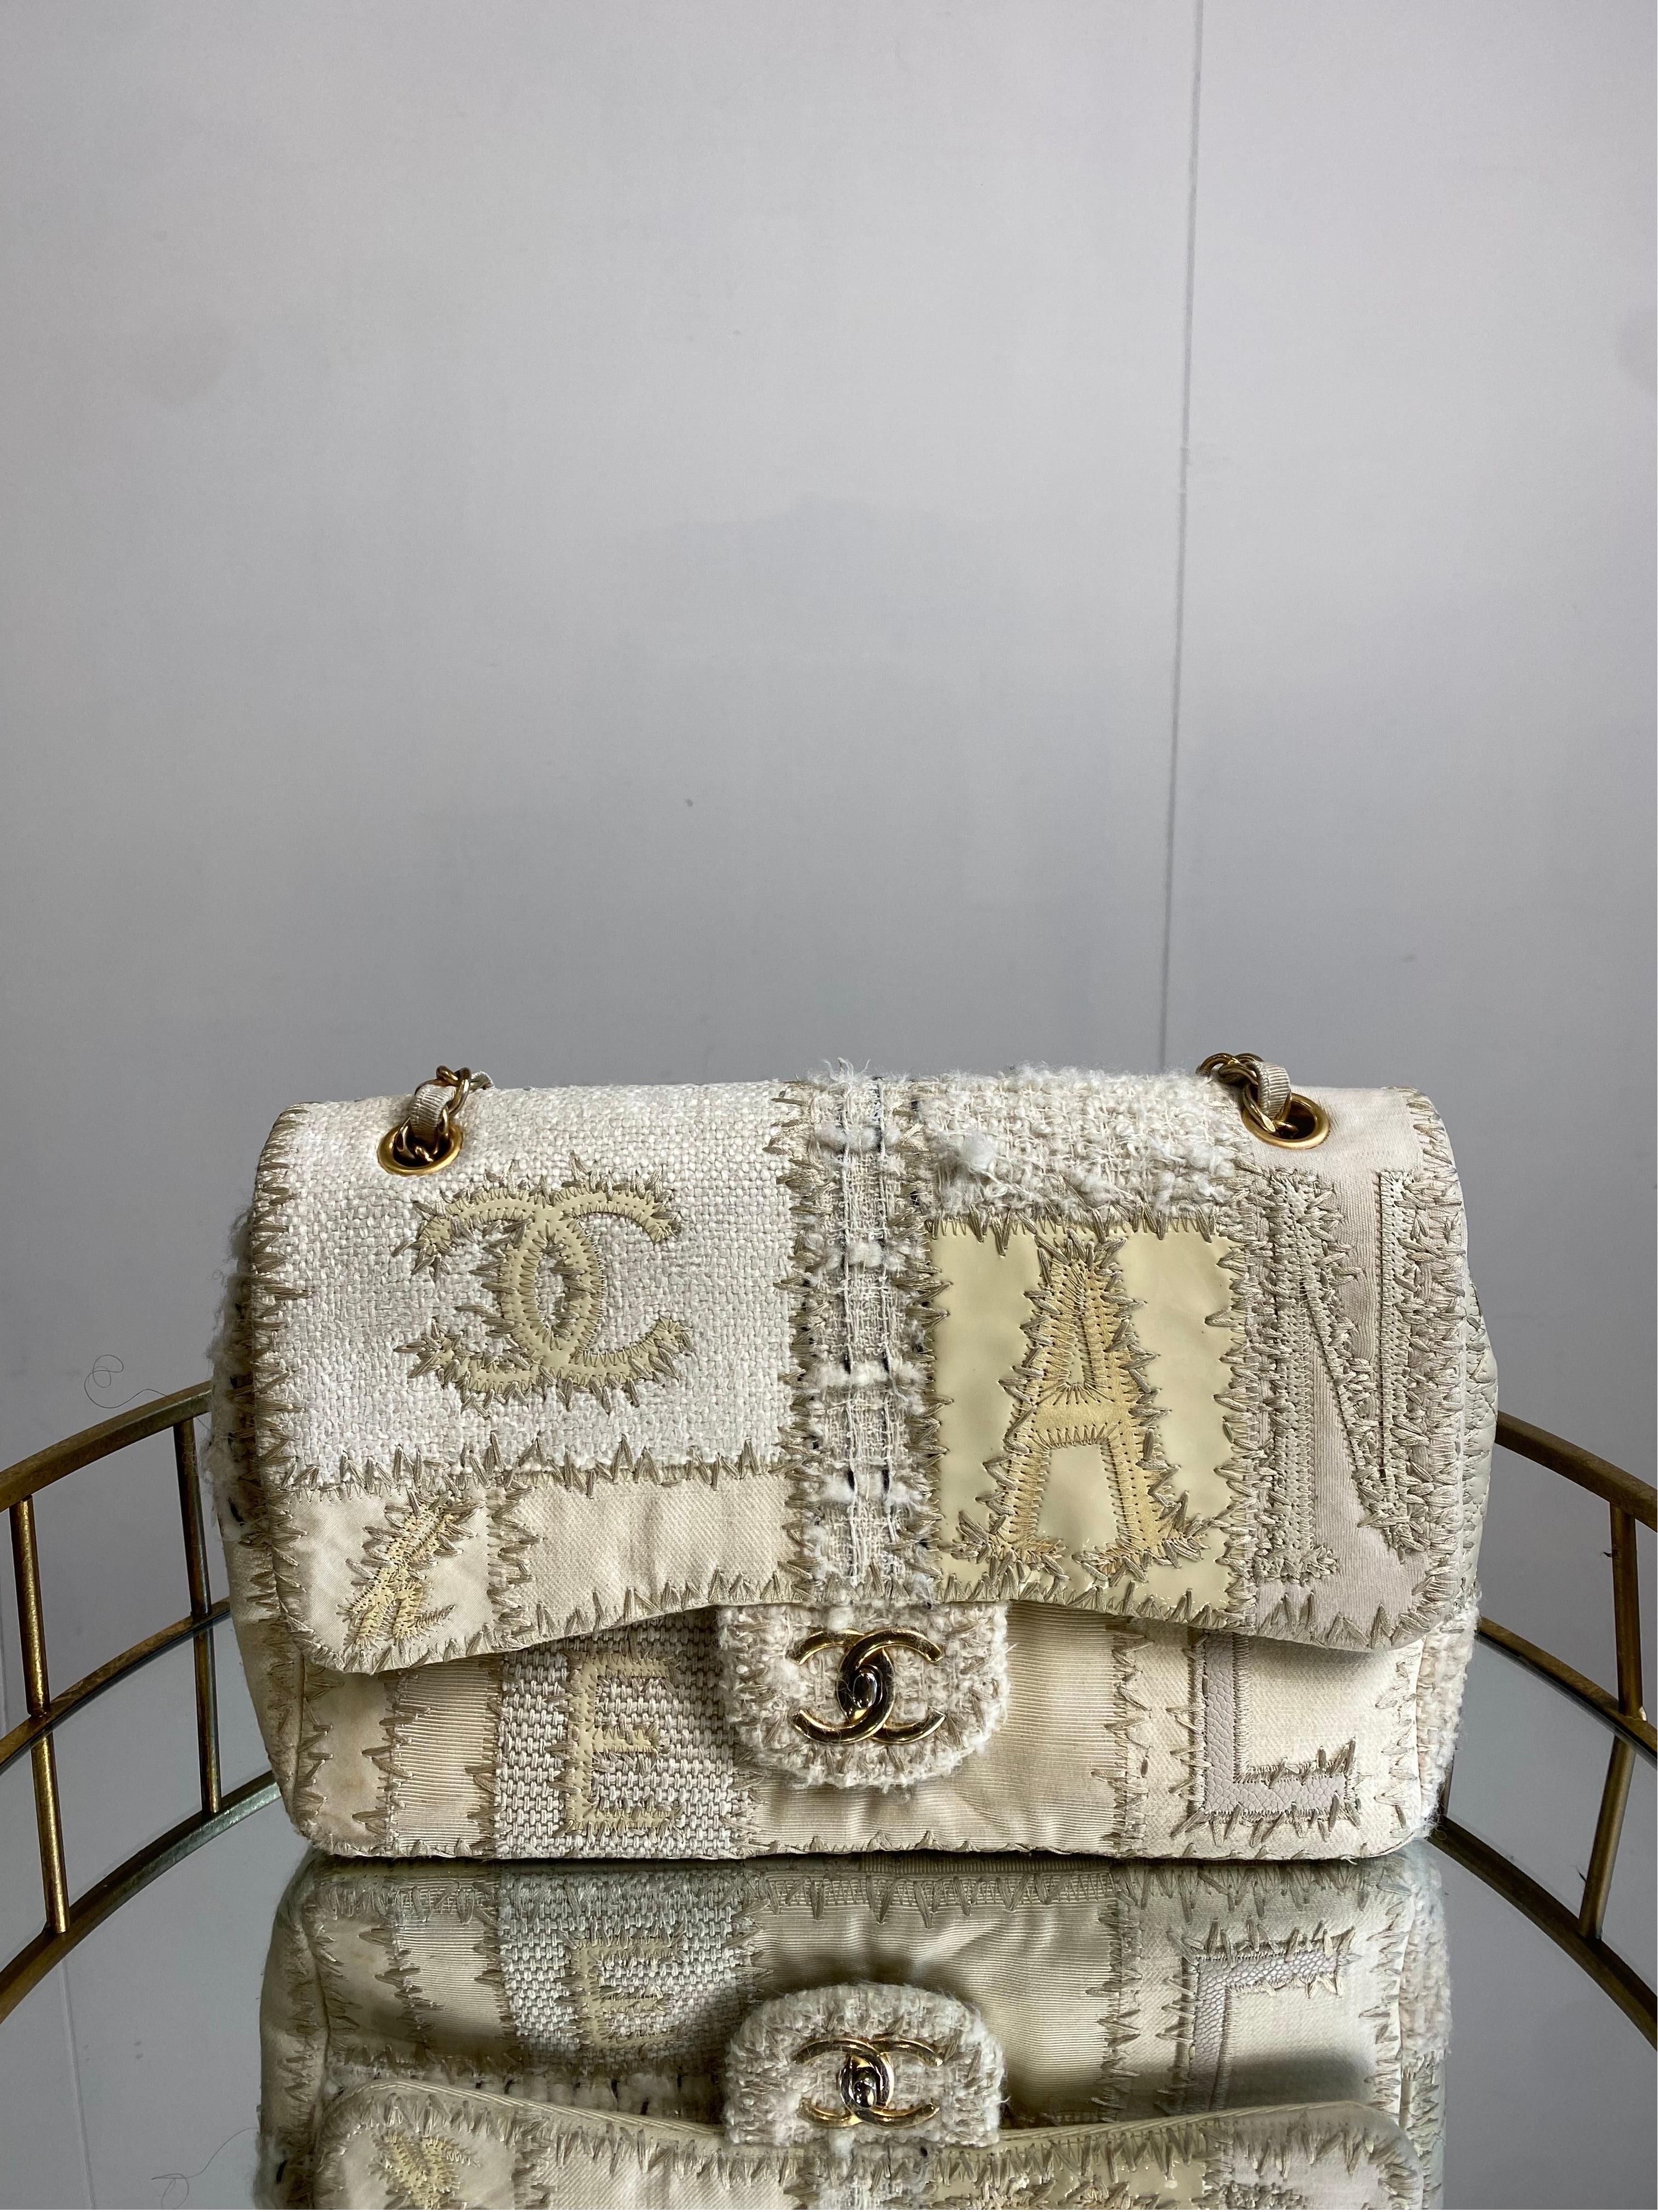 Chanel Jumbo Limited edition patchwork bag.
Mixed cream fabric exterior including tweed and patent leather.
Champagne gold hardware
Signature CC turn lock clasp.
Height 21 cm
Width 29 cm
Depth 8 cm
It has several points of light blackening on the